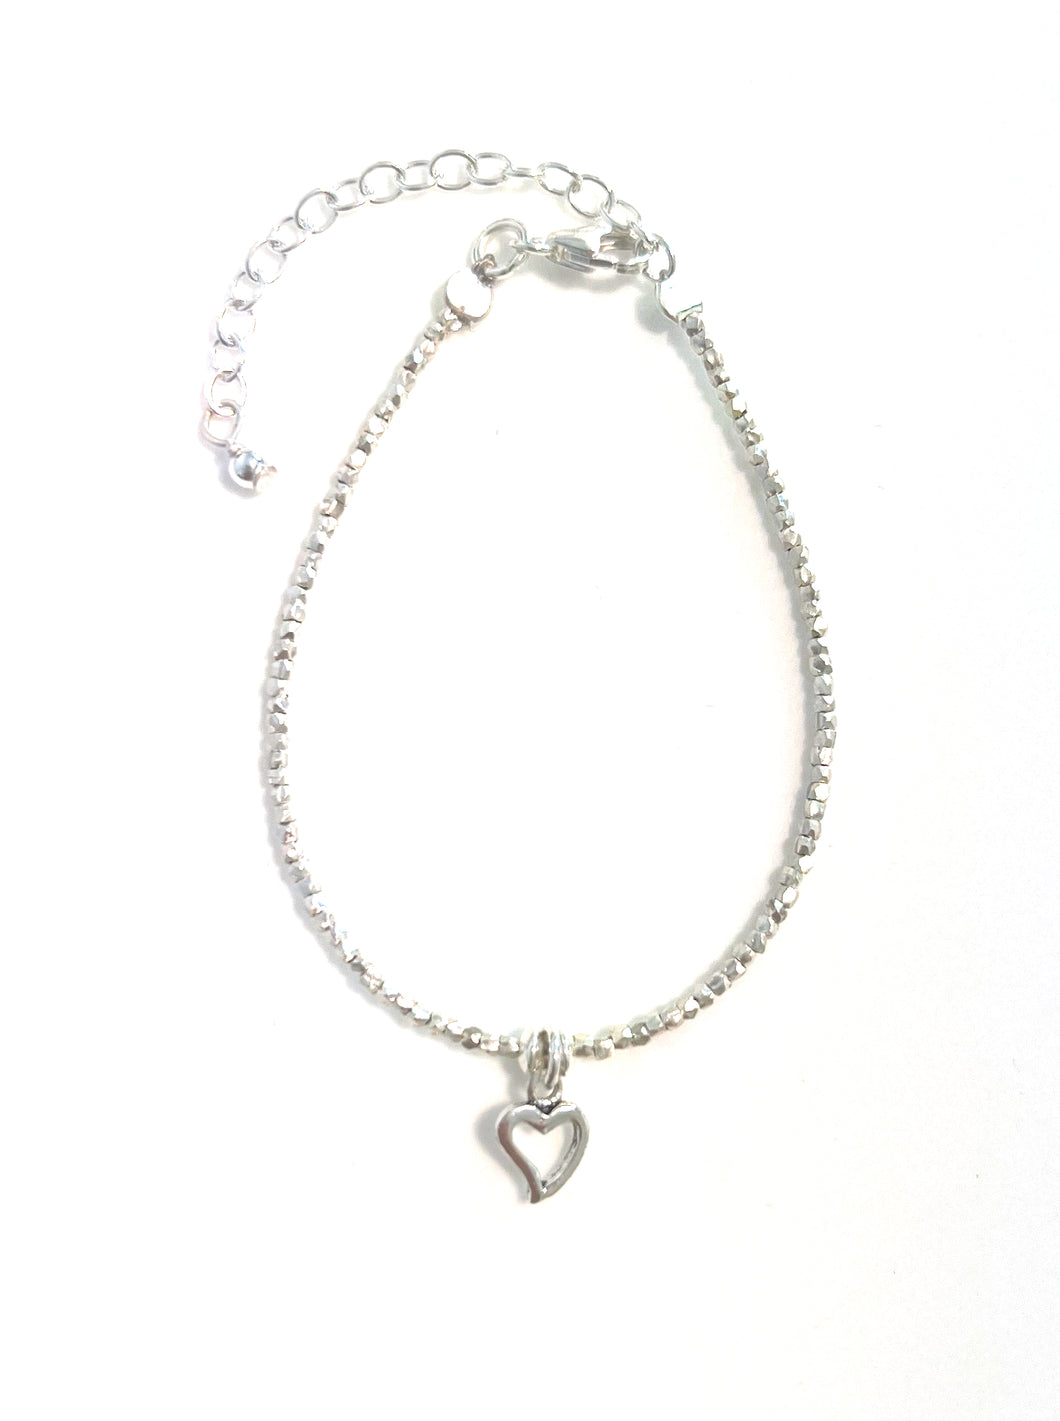 Sterling Silver Bracelet with Sterling Silver Heart